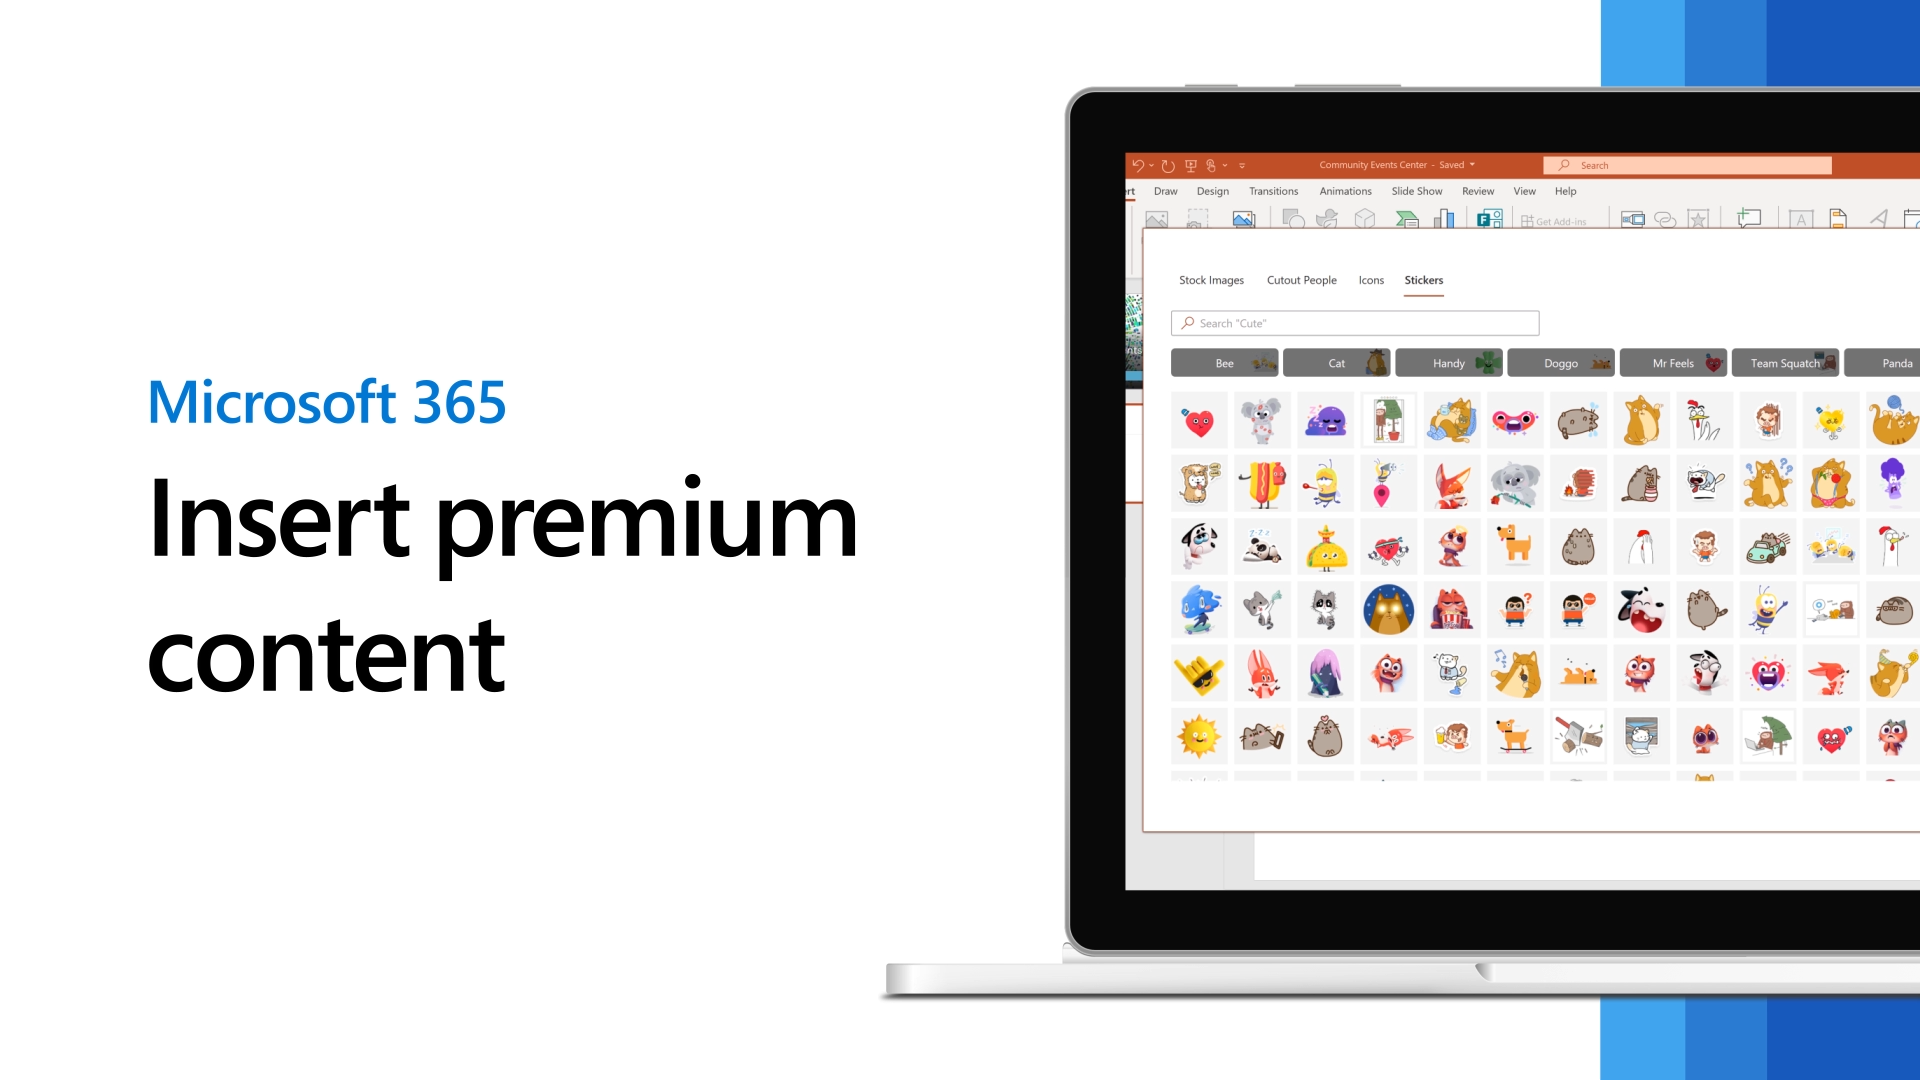 Insert images, icons, and more in Microsoft 365 - Microsoft Support